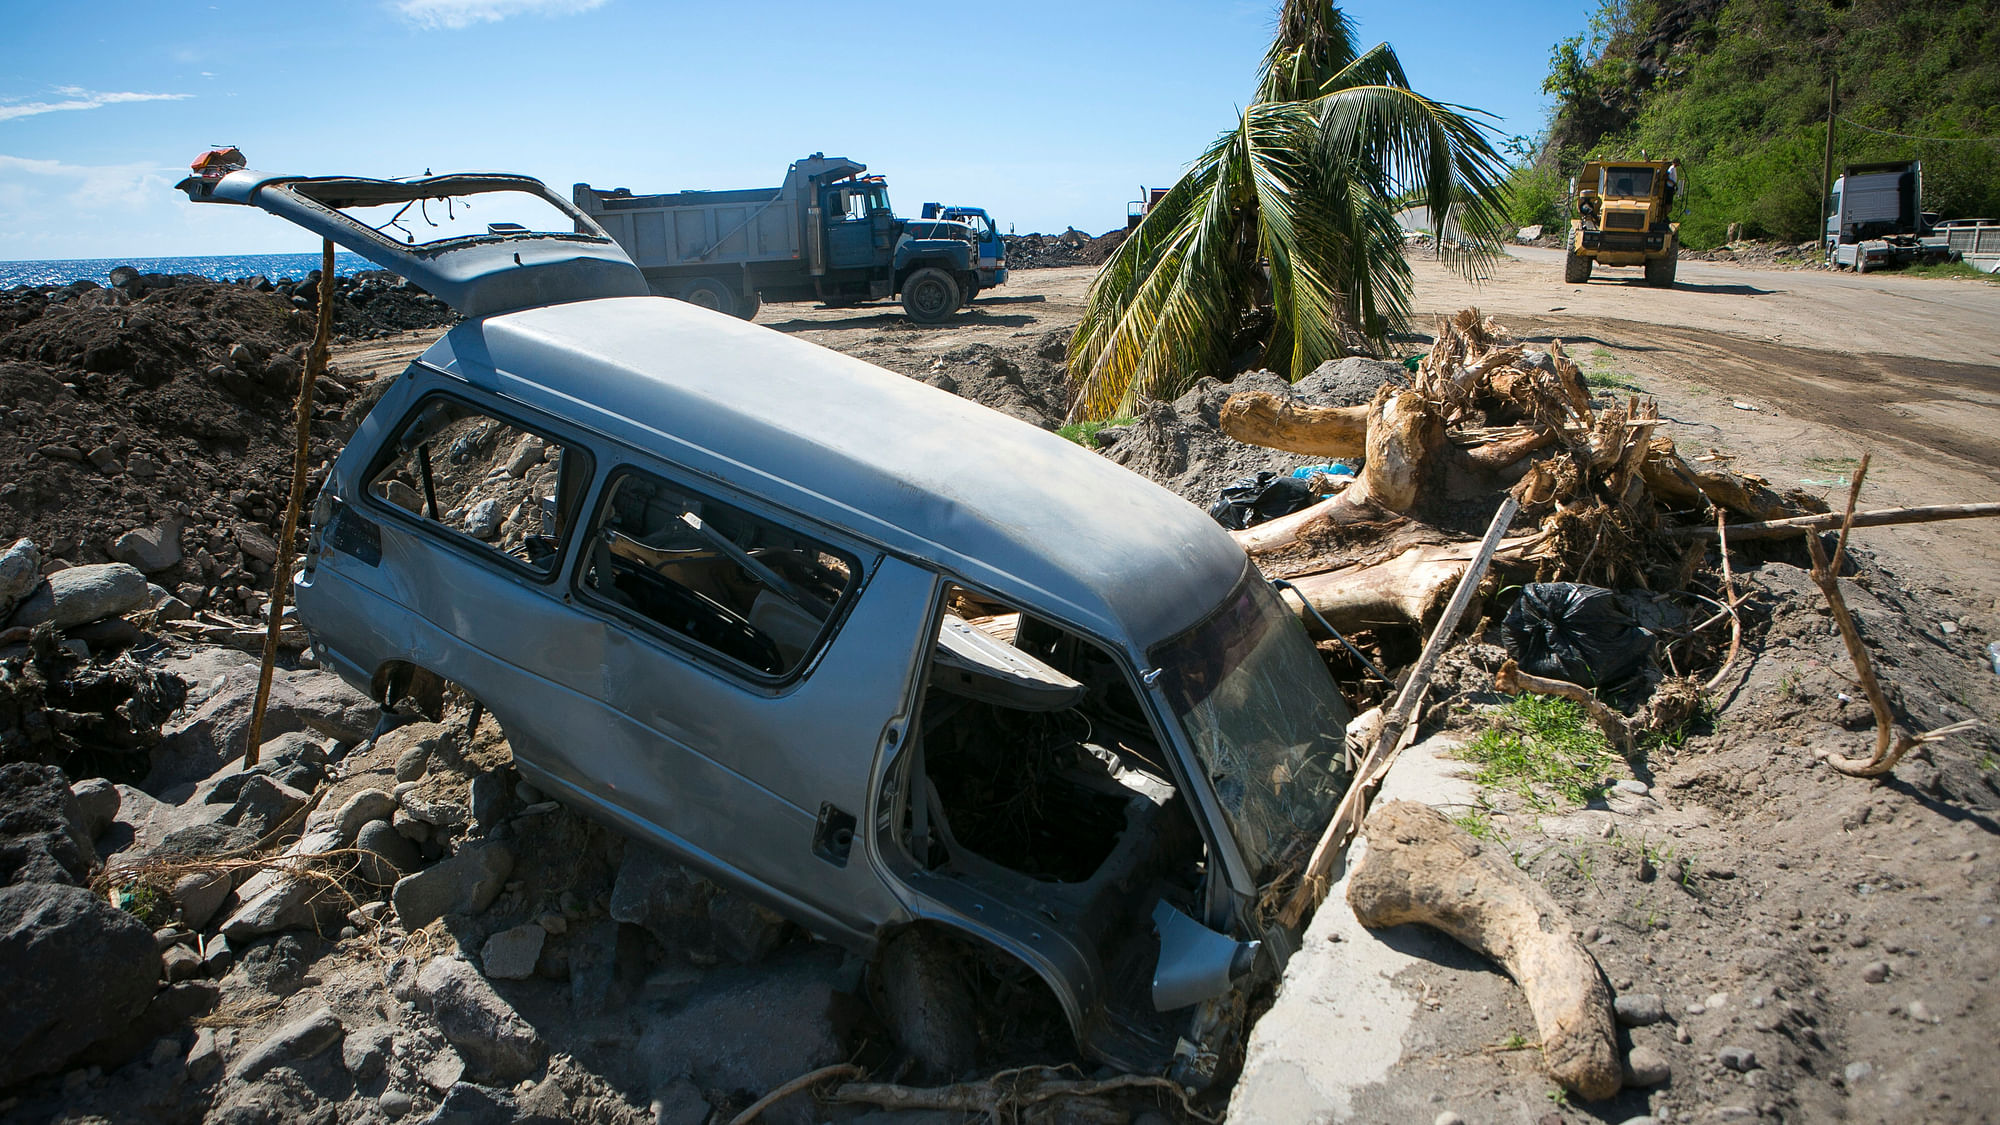 This Monday, 9 October 2017 photo shows a destroyed vehicle in the village of Coulibistrie, Dominica after water and debris came rushing down the hill.&nbsp;